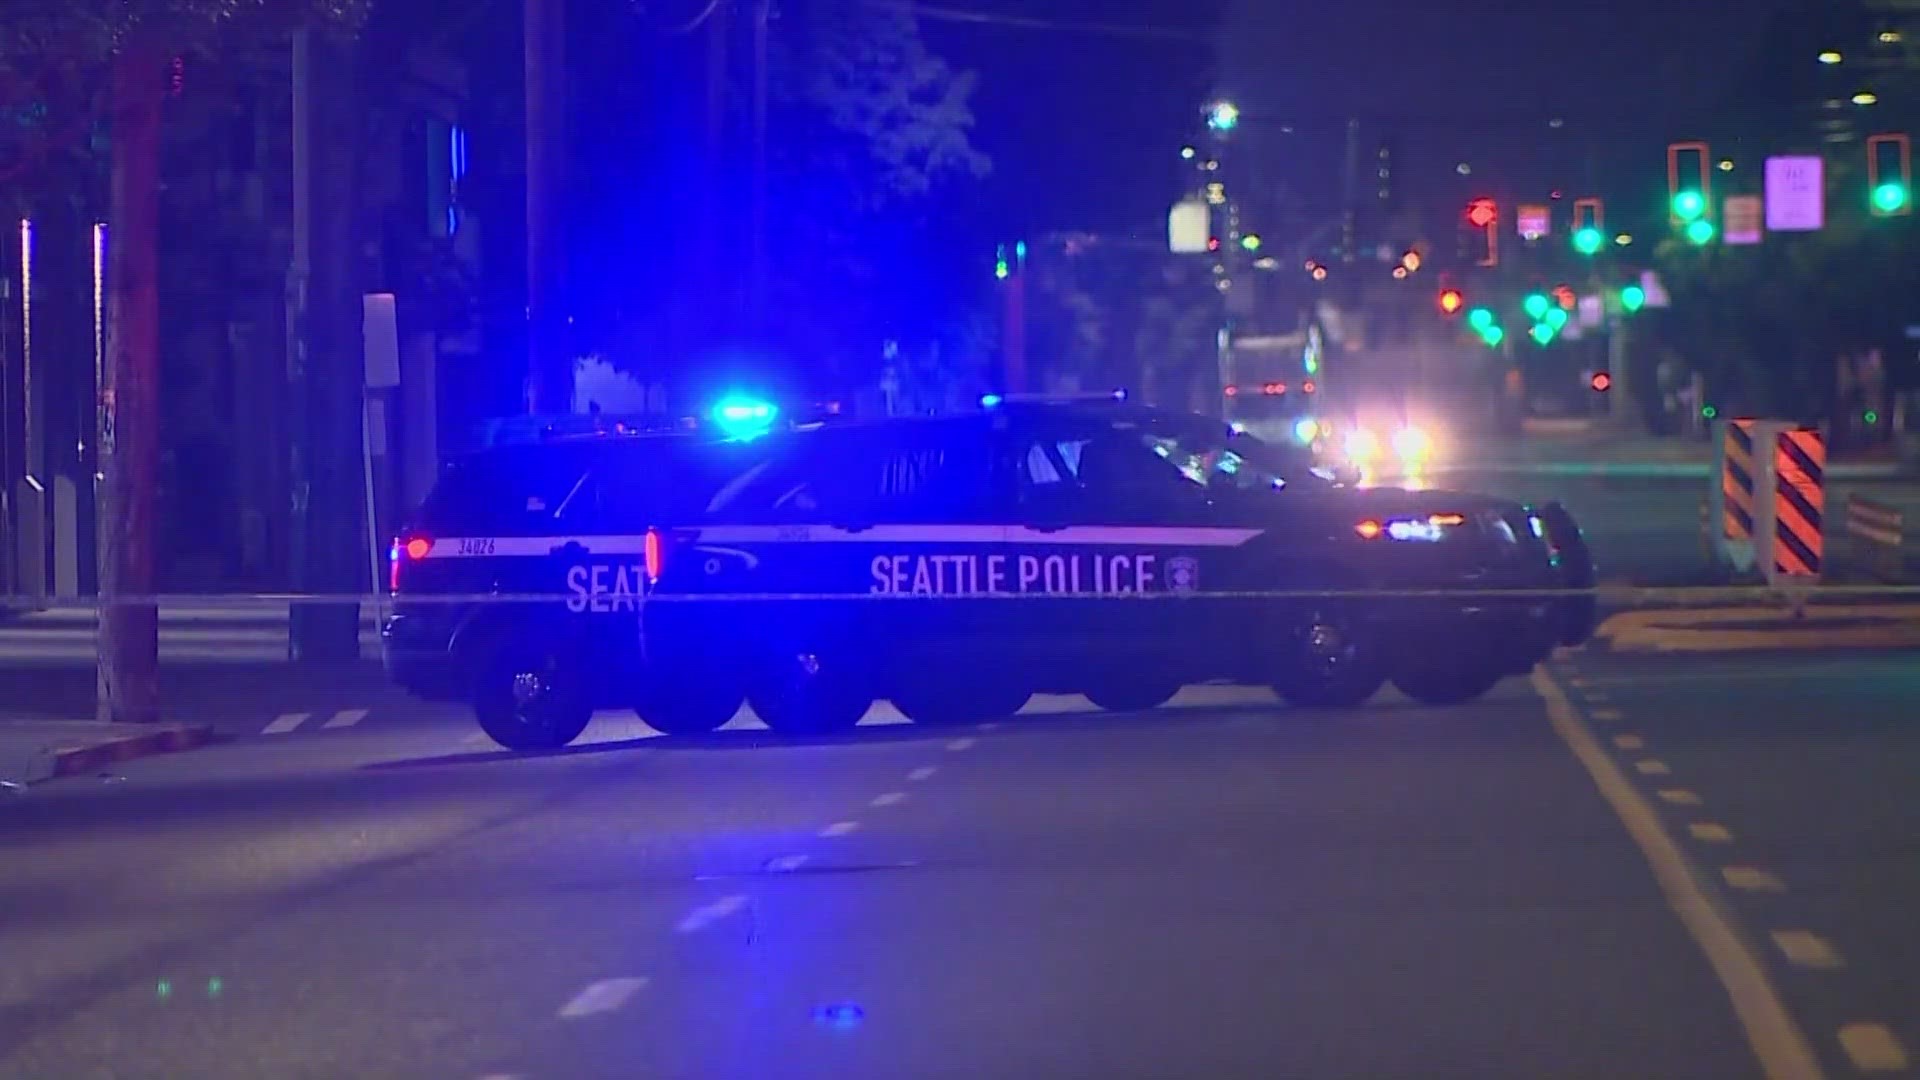 Two men were injured in an exchange of gunfire and another man was found dead in a separate incident in the SODO neighborhood all within 24 hours.